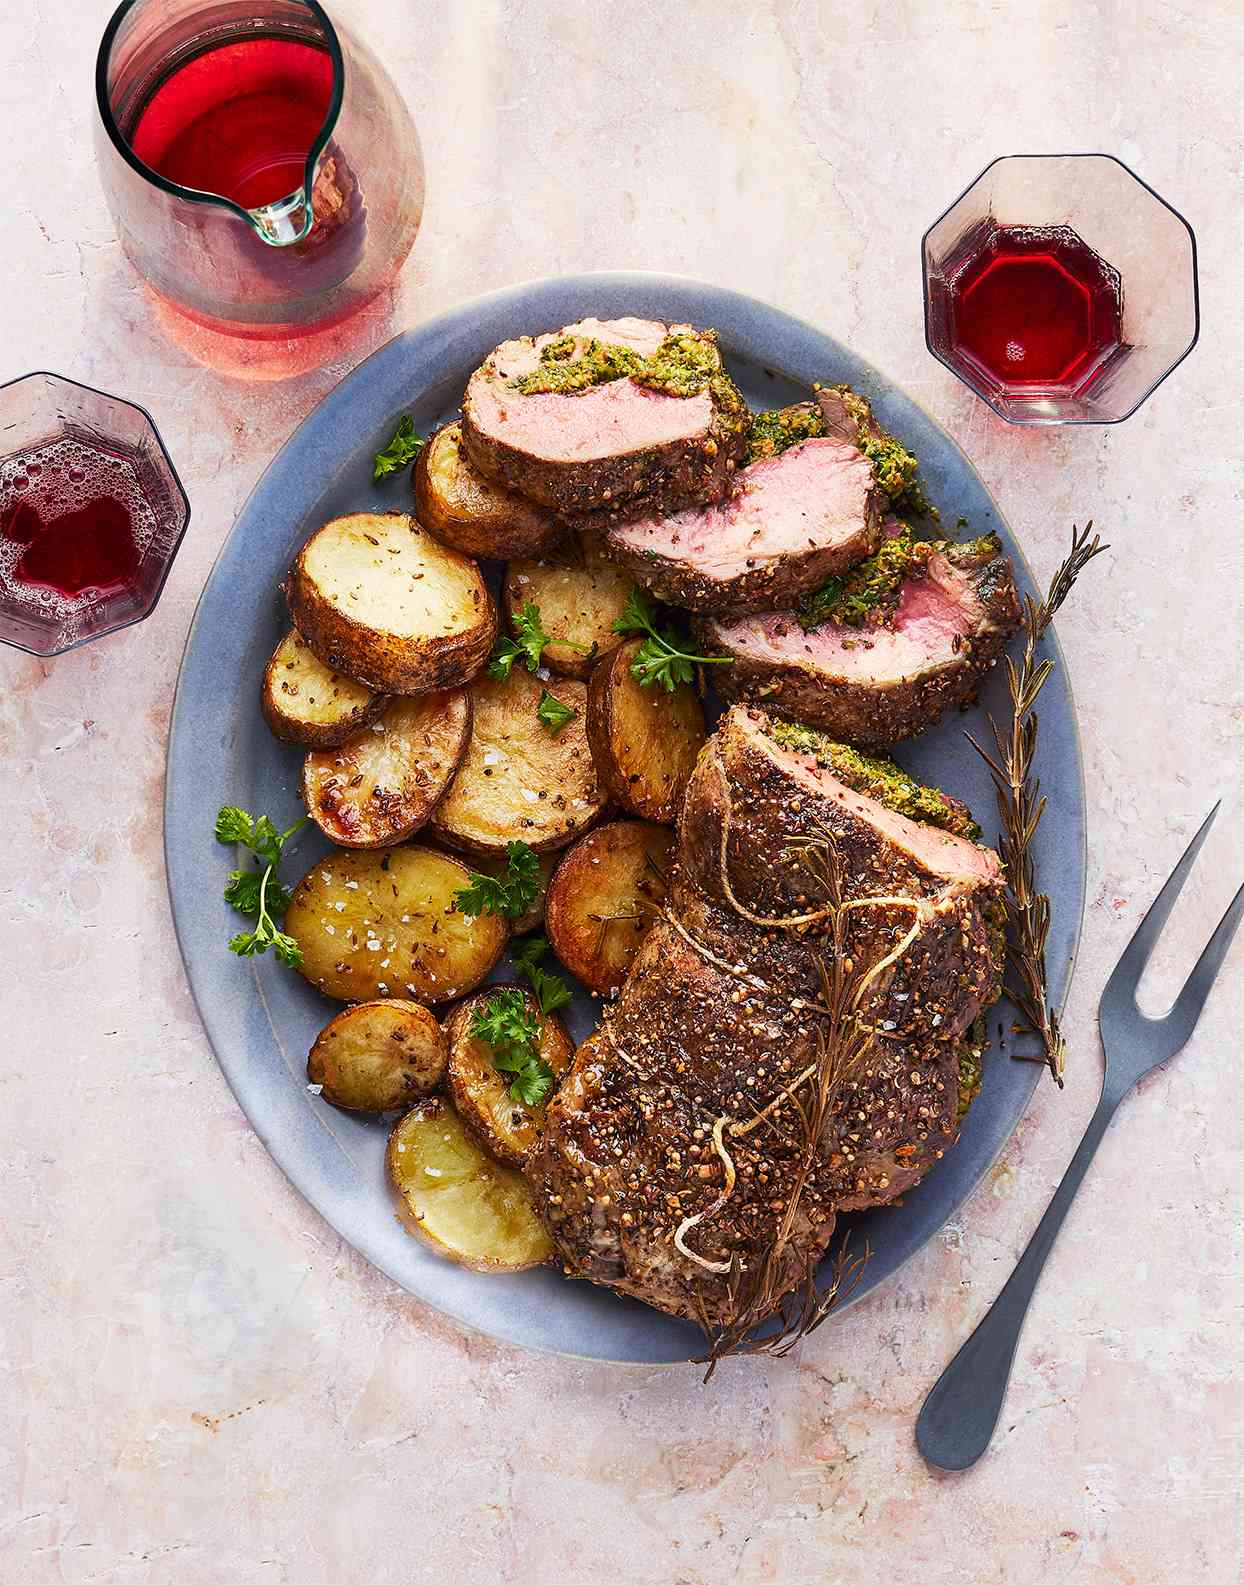 Leg of Lamb With Pistachio Stuffing and Potatoes